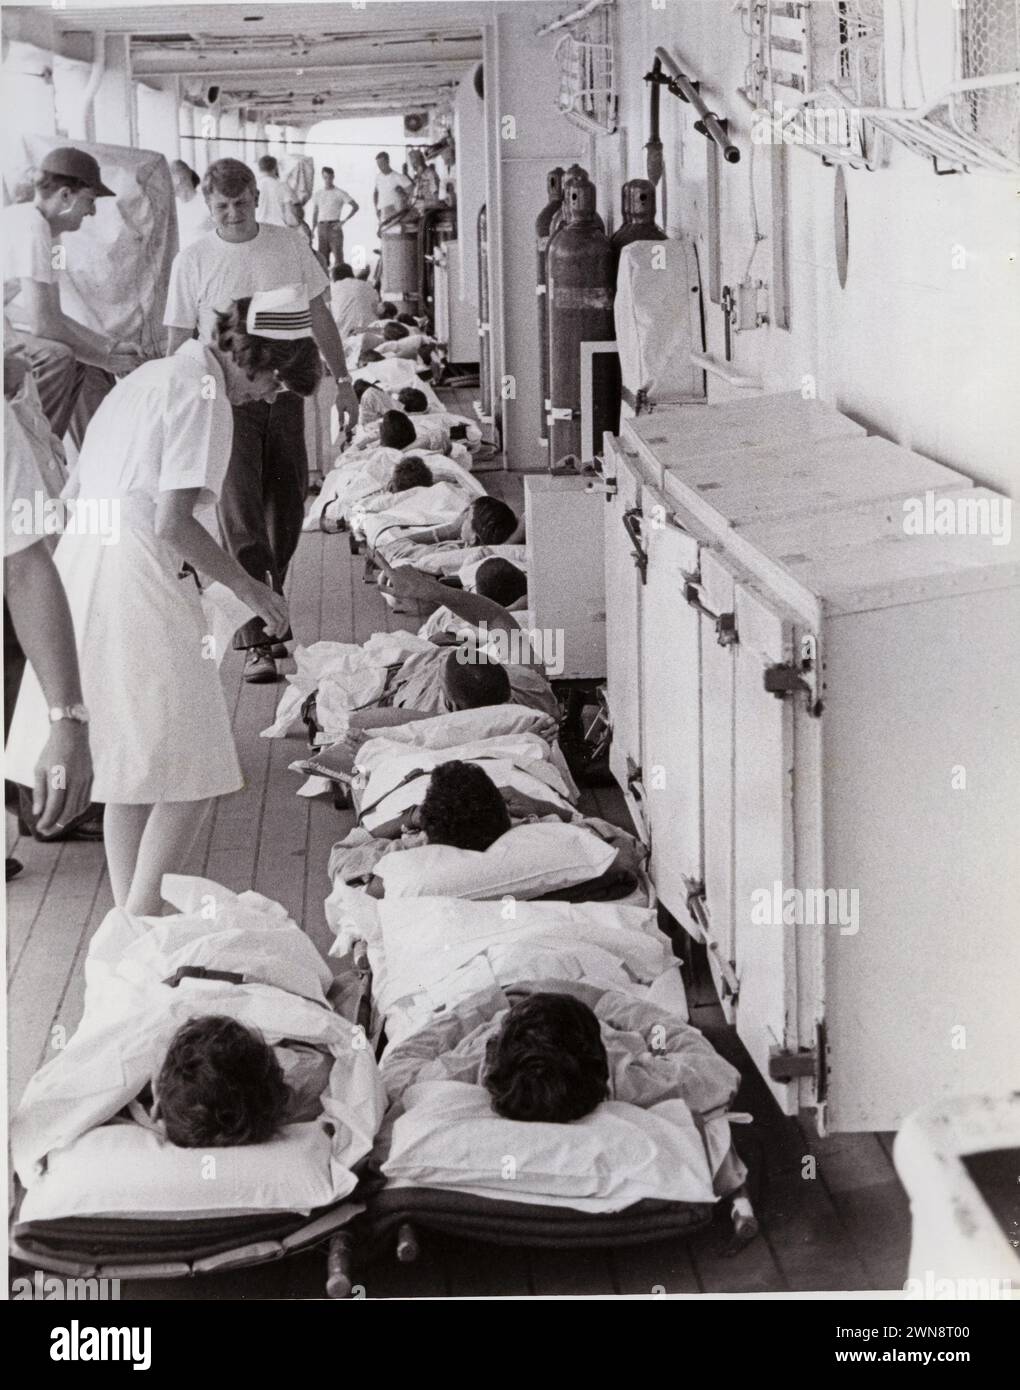 South China Sea. A Navy Nurse attends the sick and wounded on stretchers on the deck of the hospital ship USS Sanctuary (AH-17) moored in Da Nang Harbor. The men have just arrived aboard by a medical evacuation helicopter..     Nurse Corps aboard Hospital Ships.04/1970; Stock Photo